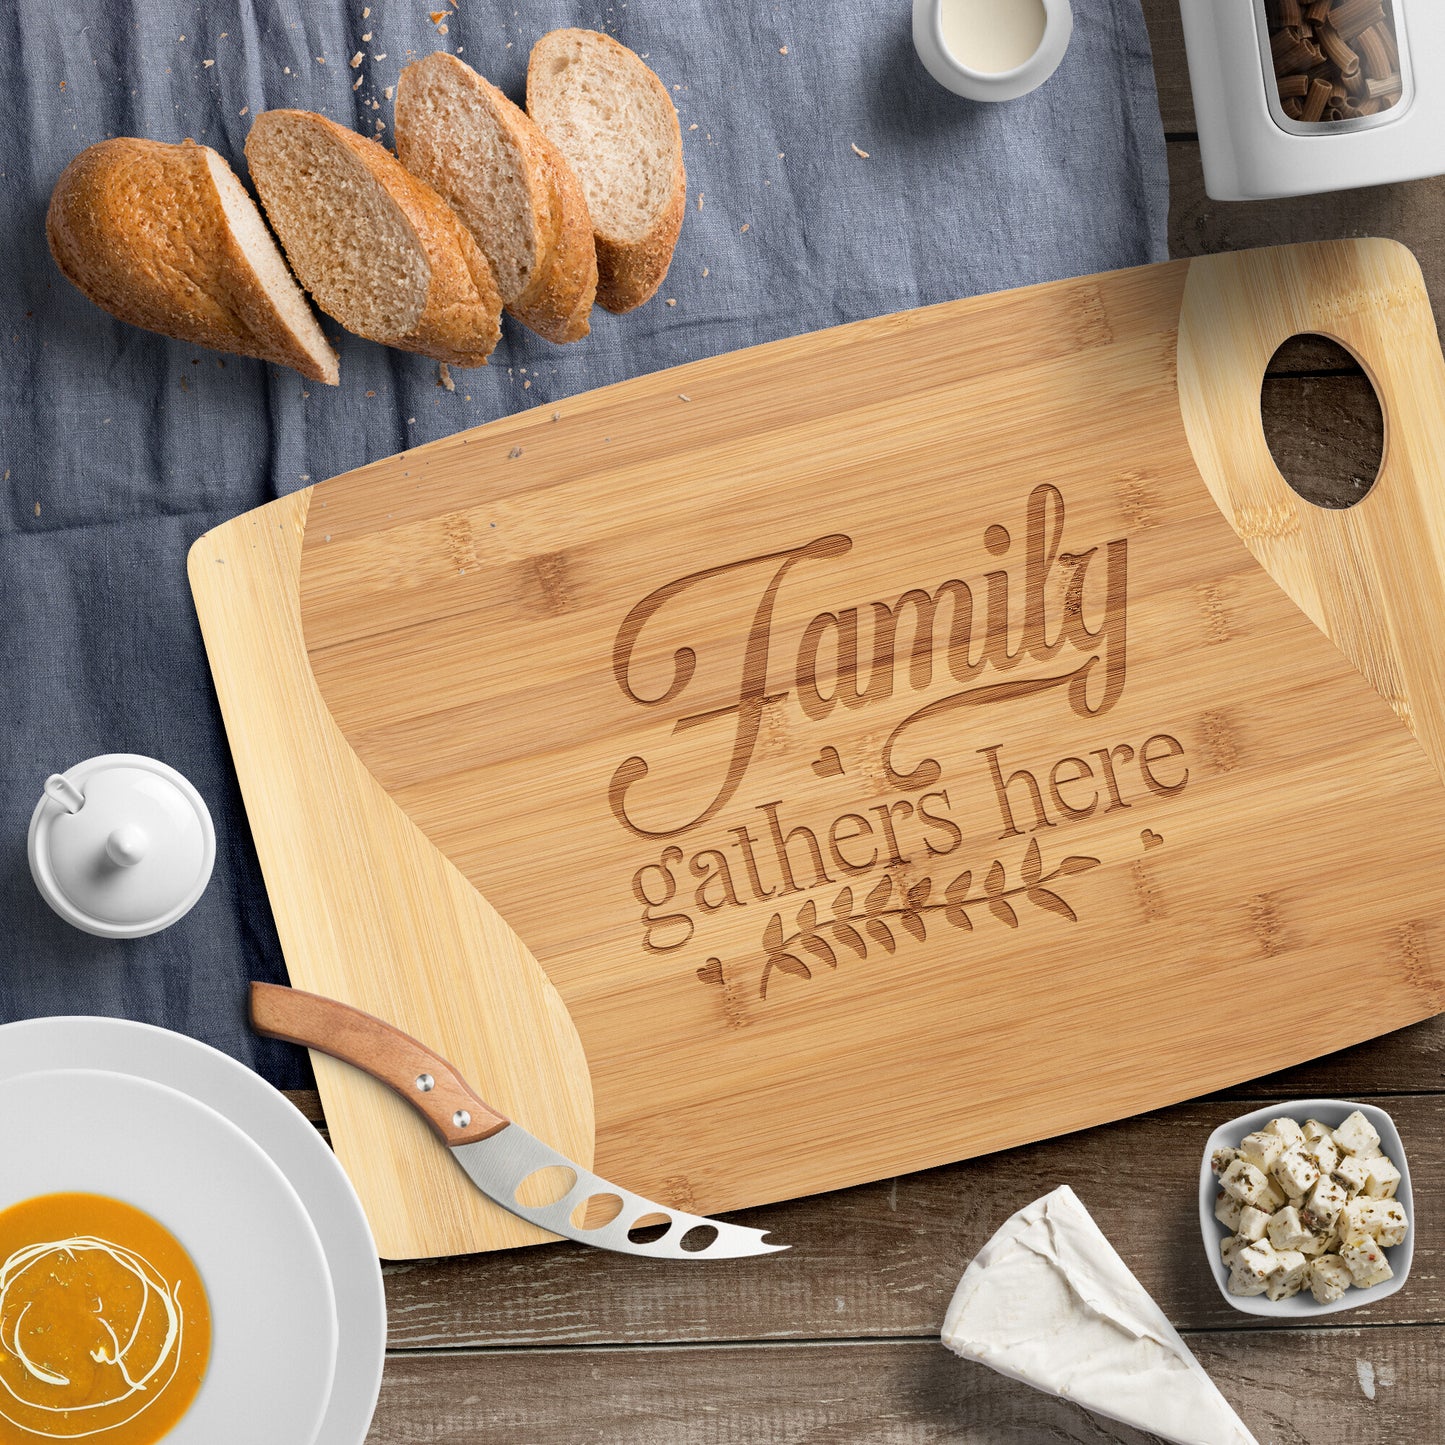 Family Gathers Here Bamboo Cutting Board